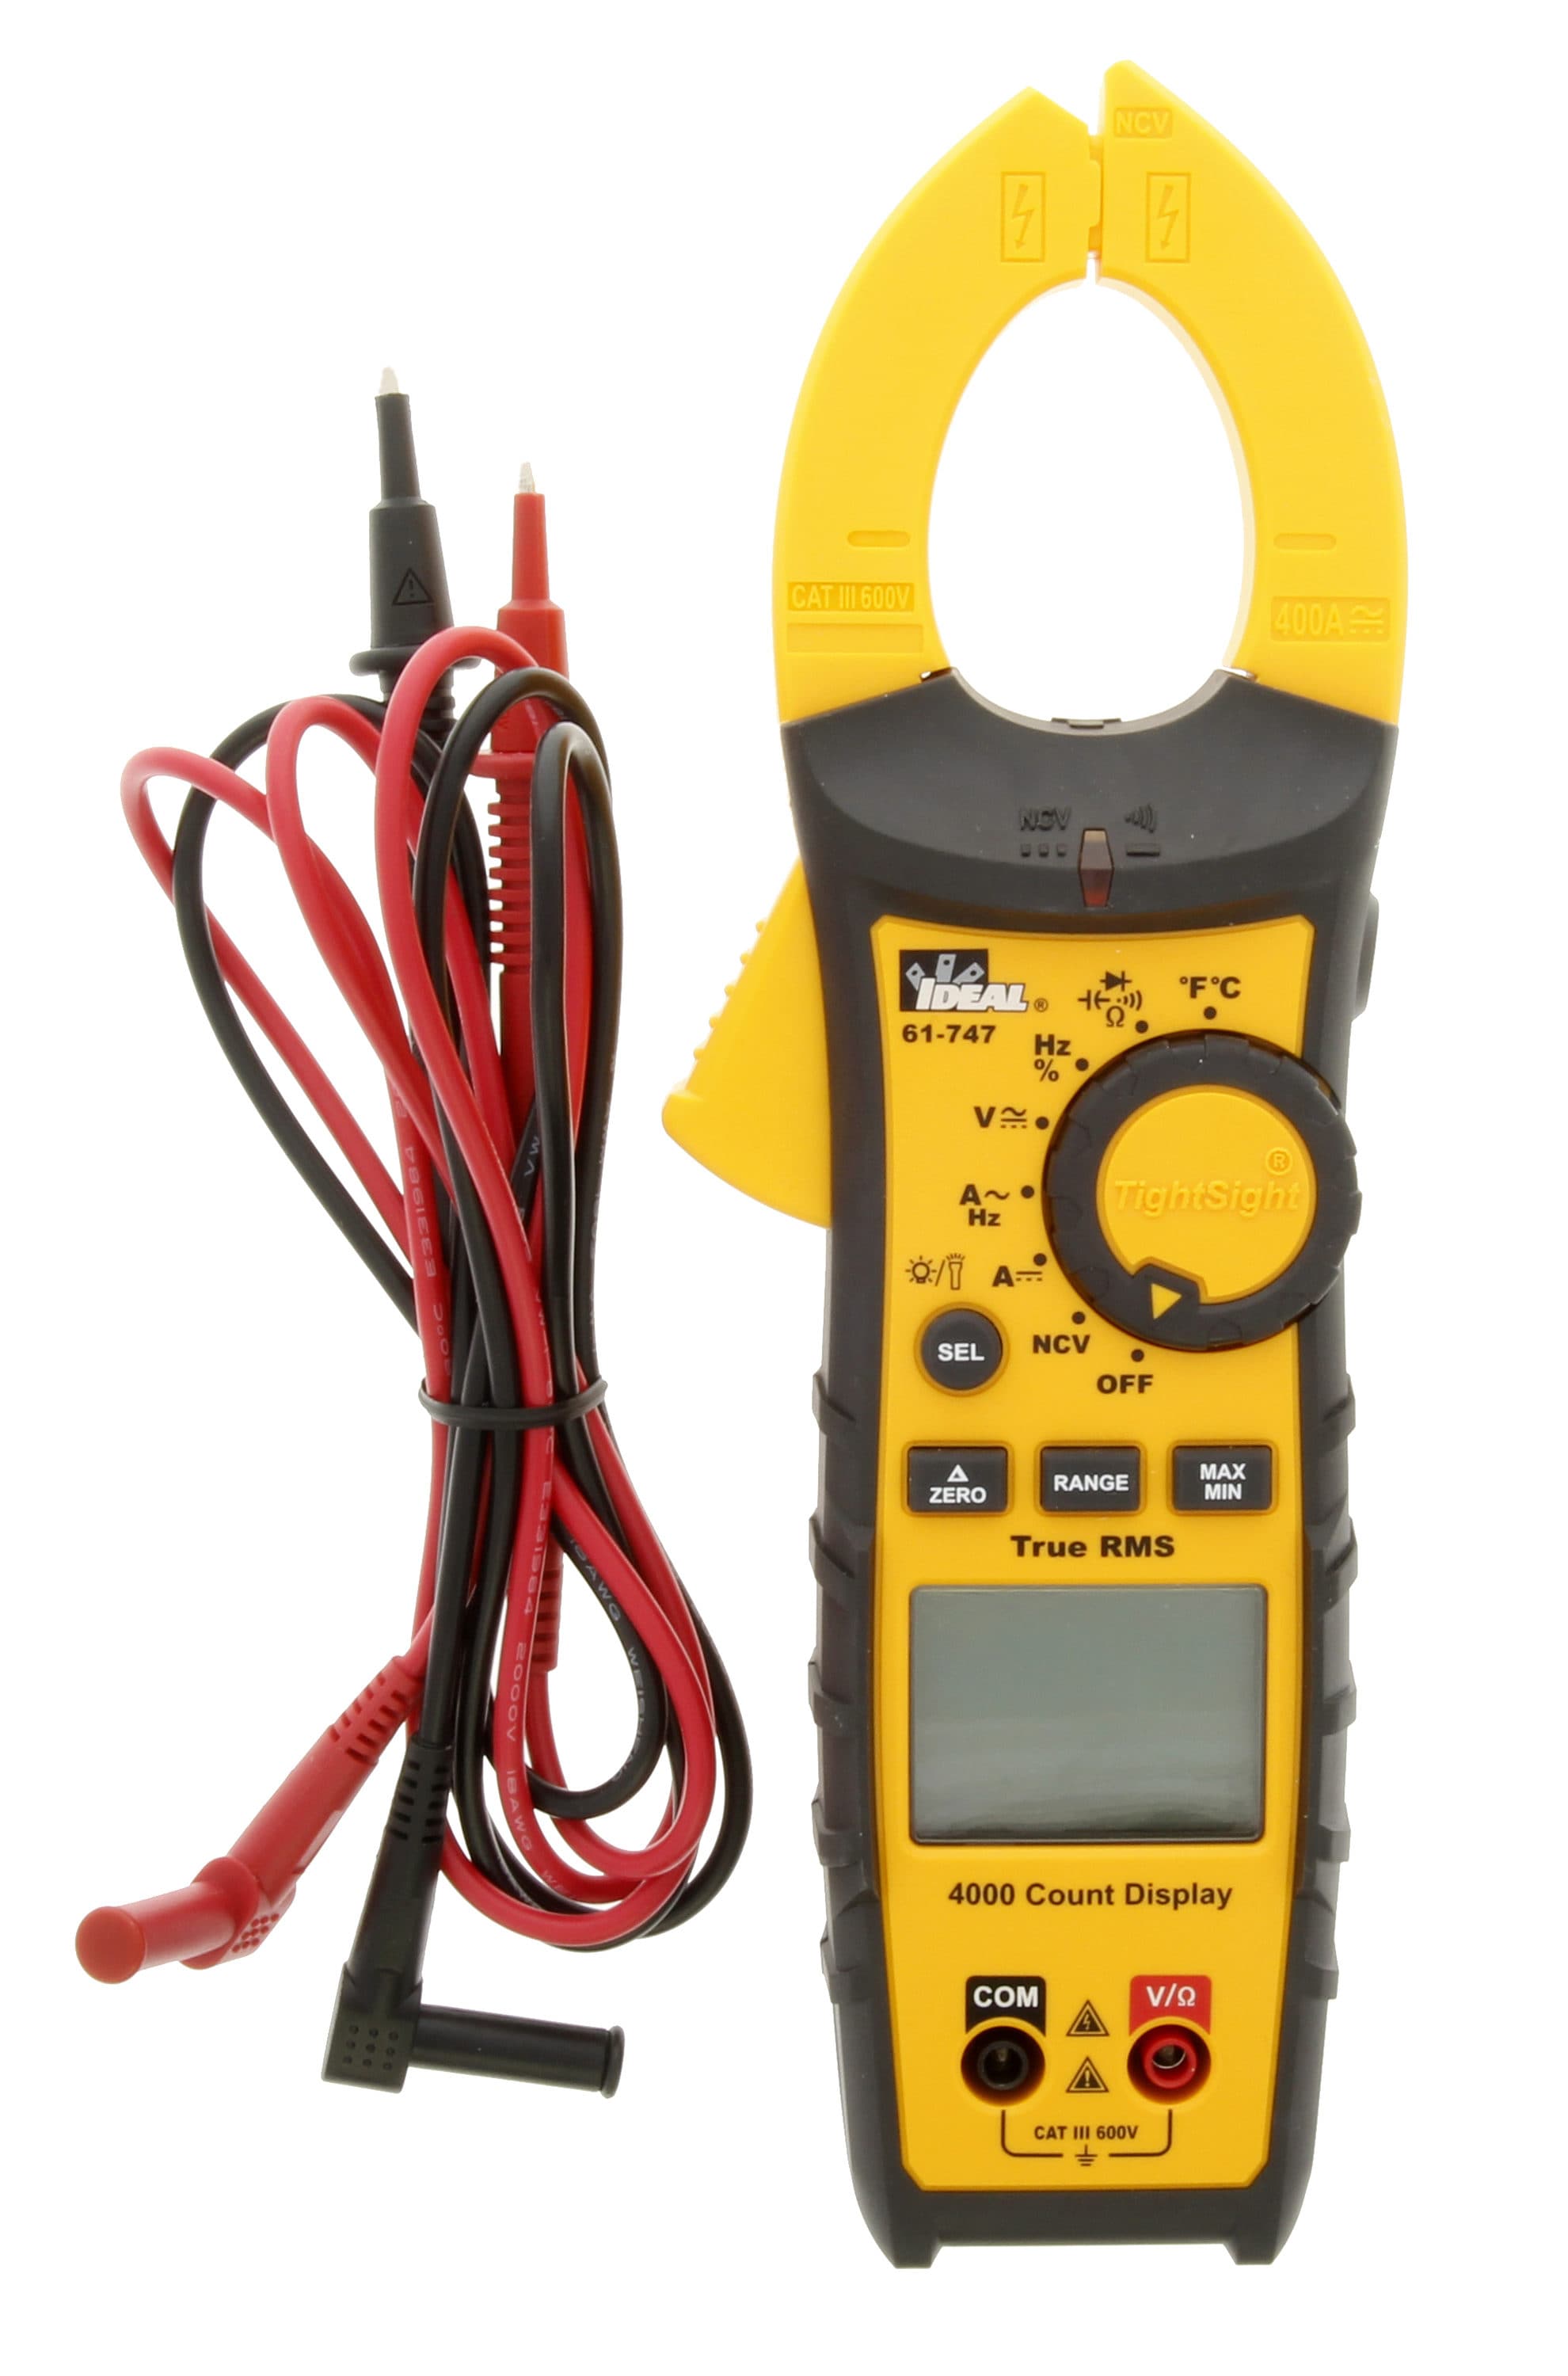 IDEAL INDUSTRIES INC. 61-775 1000 Amp TightSight Clamp Meter AC DC with TRM - 8